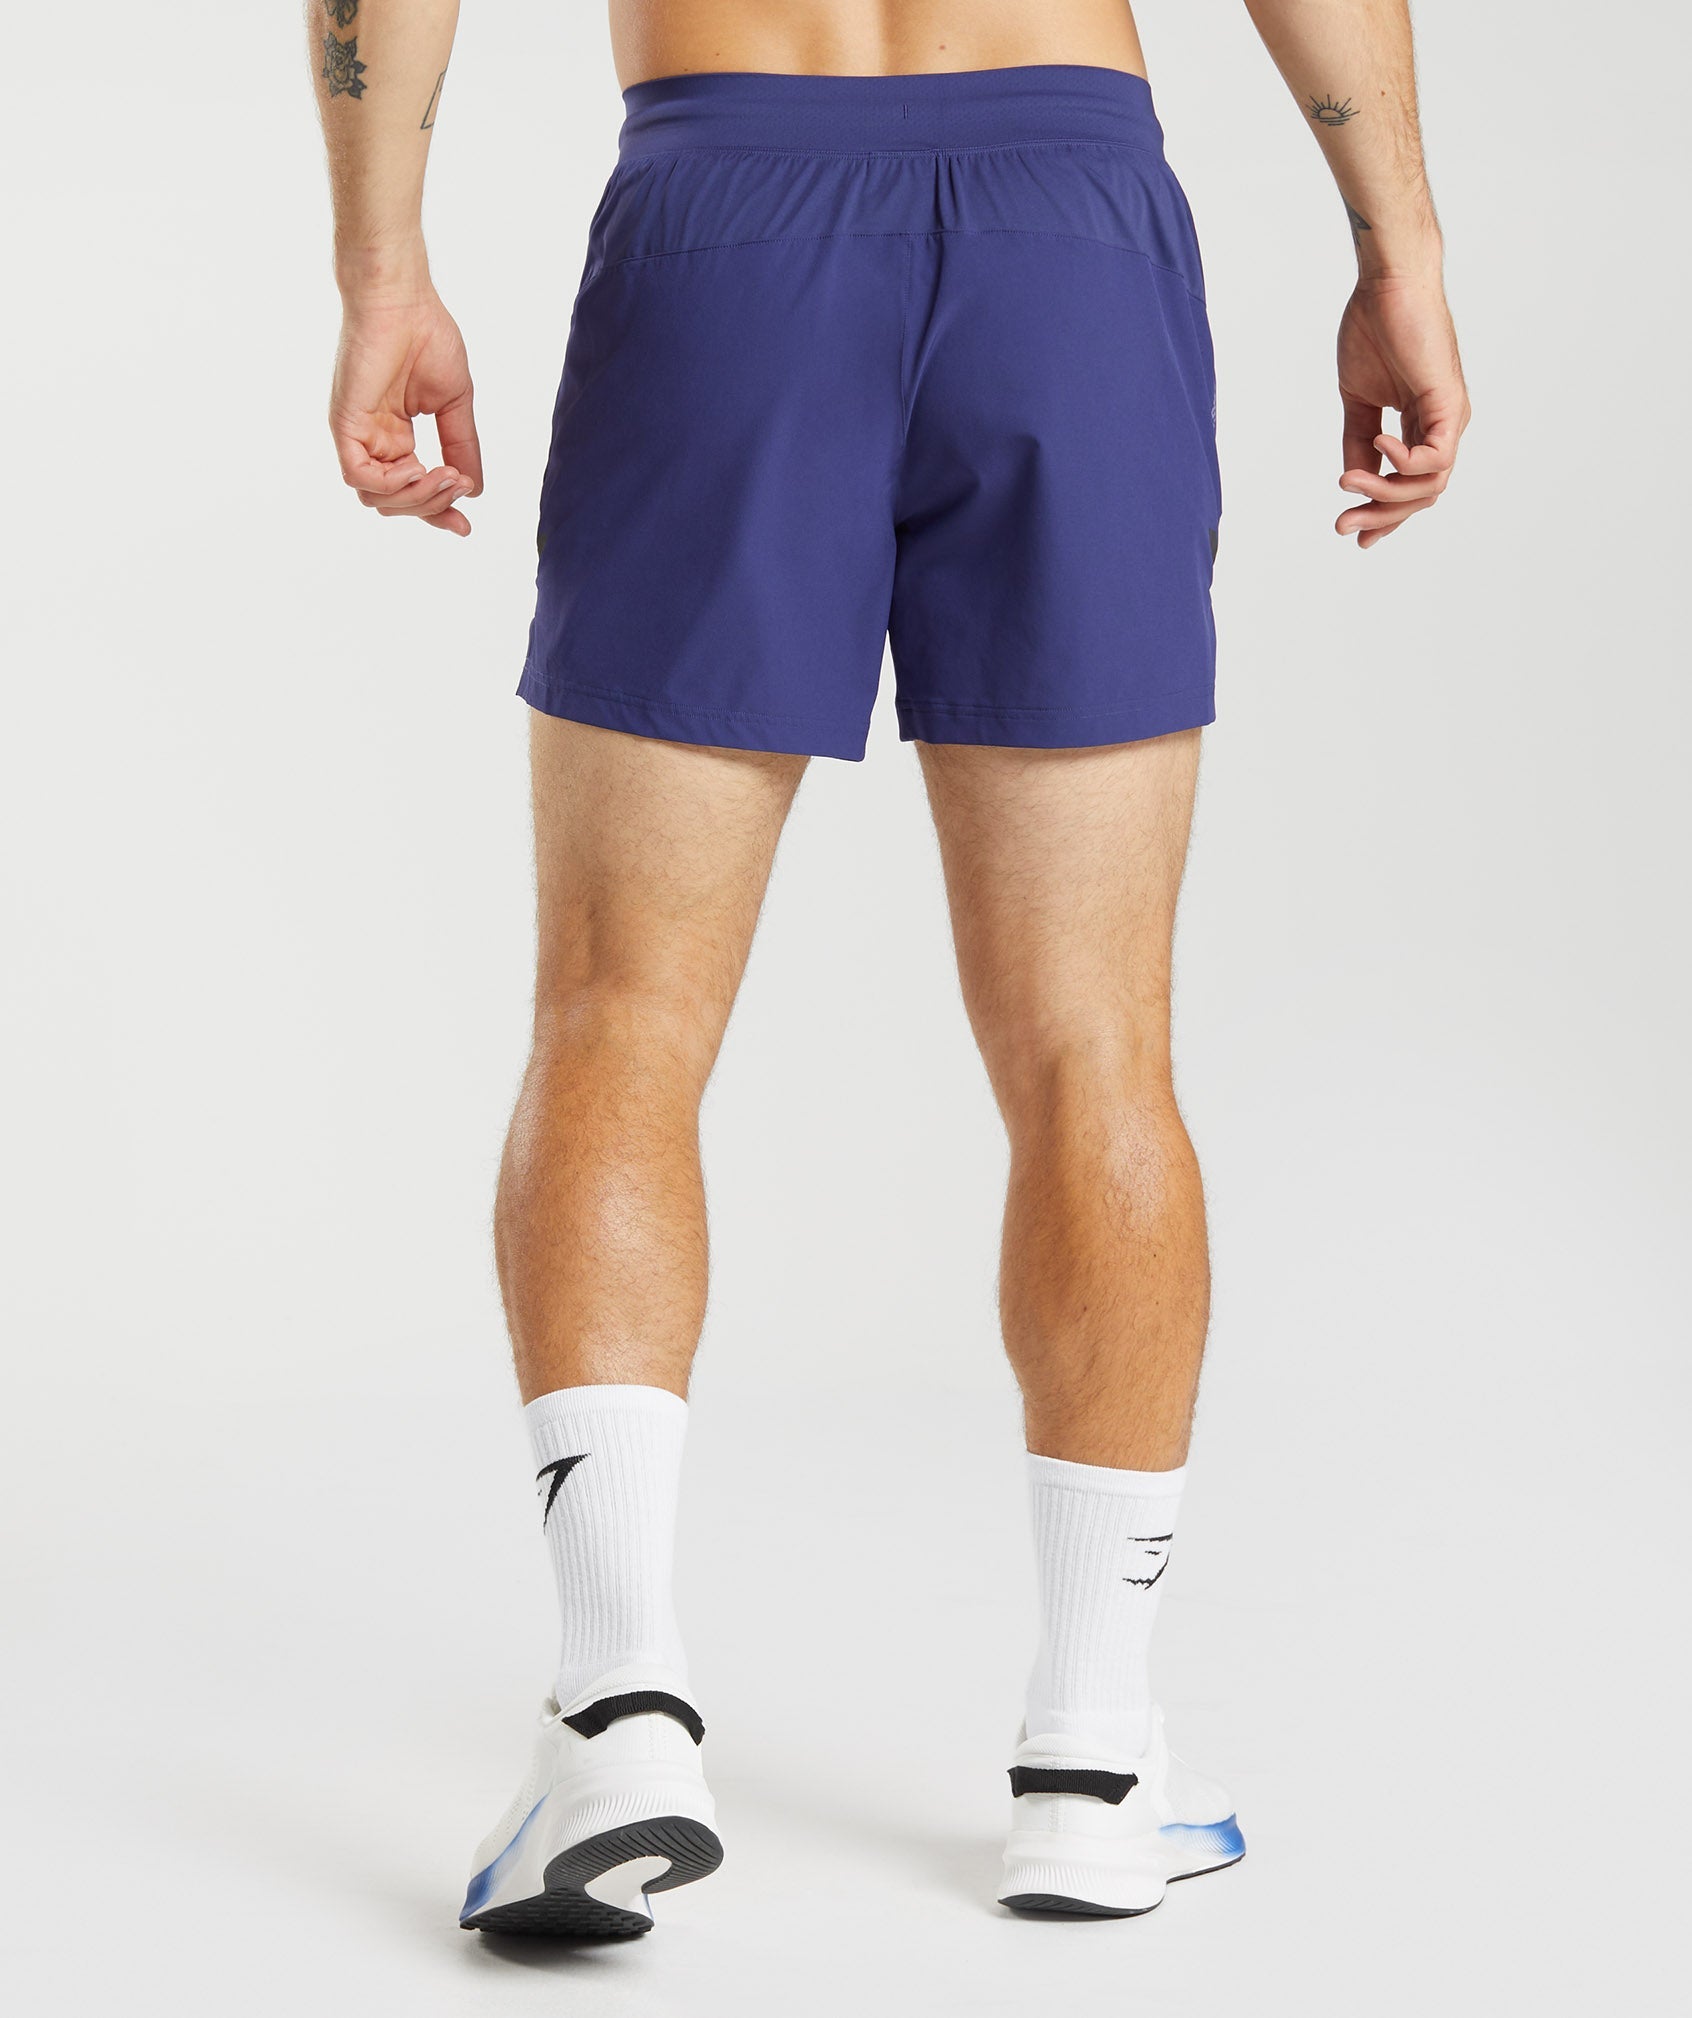 Apex 5" Perform Shorts in Neptune Purple - view 2